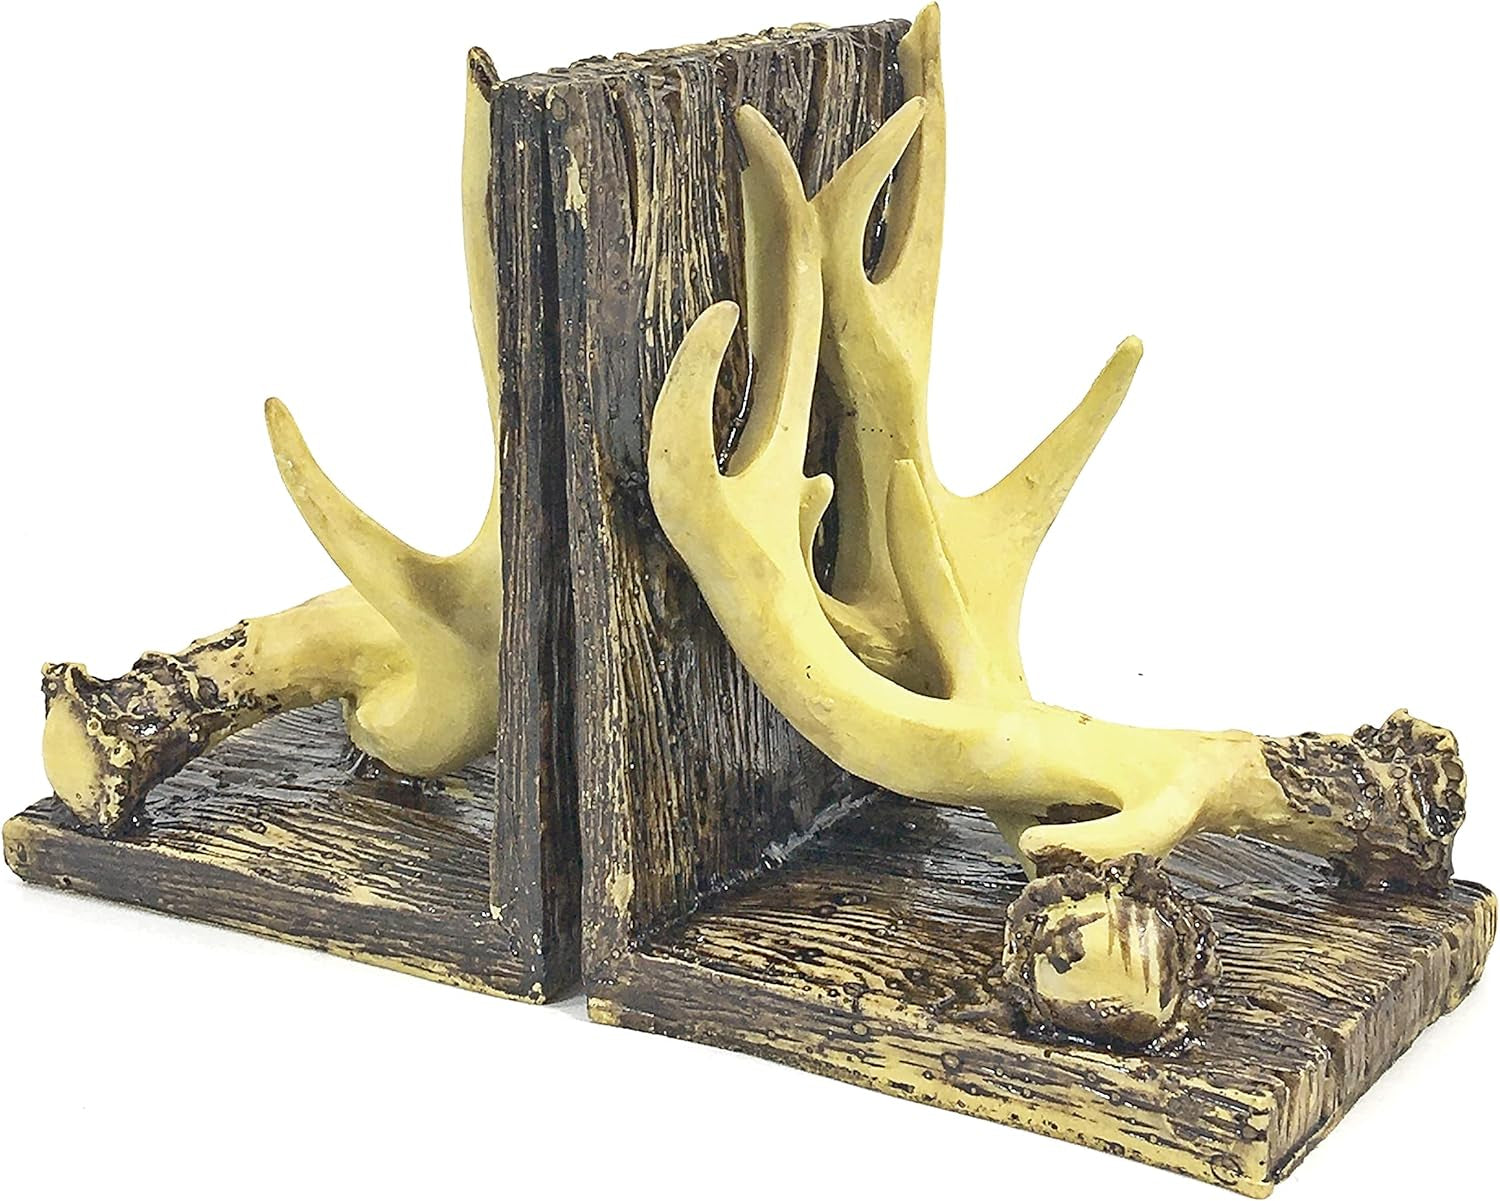 Decorative Bookends Deer Antler Unique Vintage Book Ends Shelves Stoppers Holder Heavy Duty Nonskid Rustic Mountain Cabin Lodge Farmhouse Home Office Decor 7 Inch